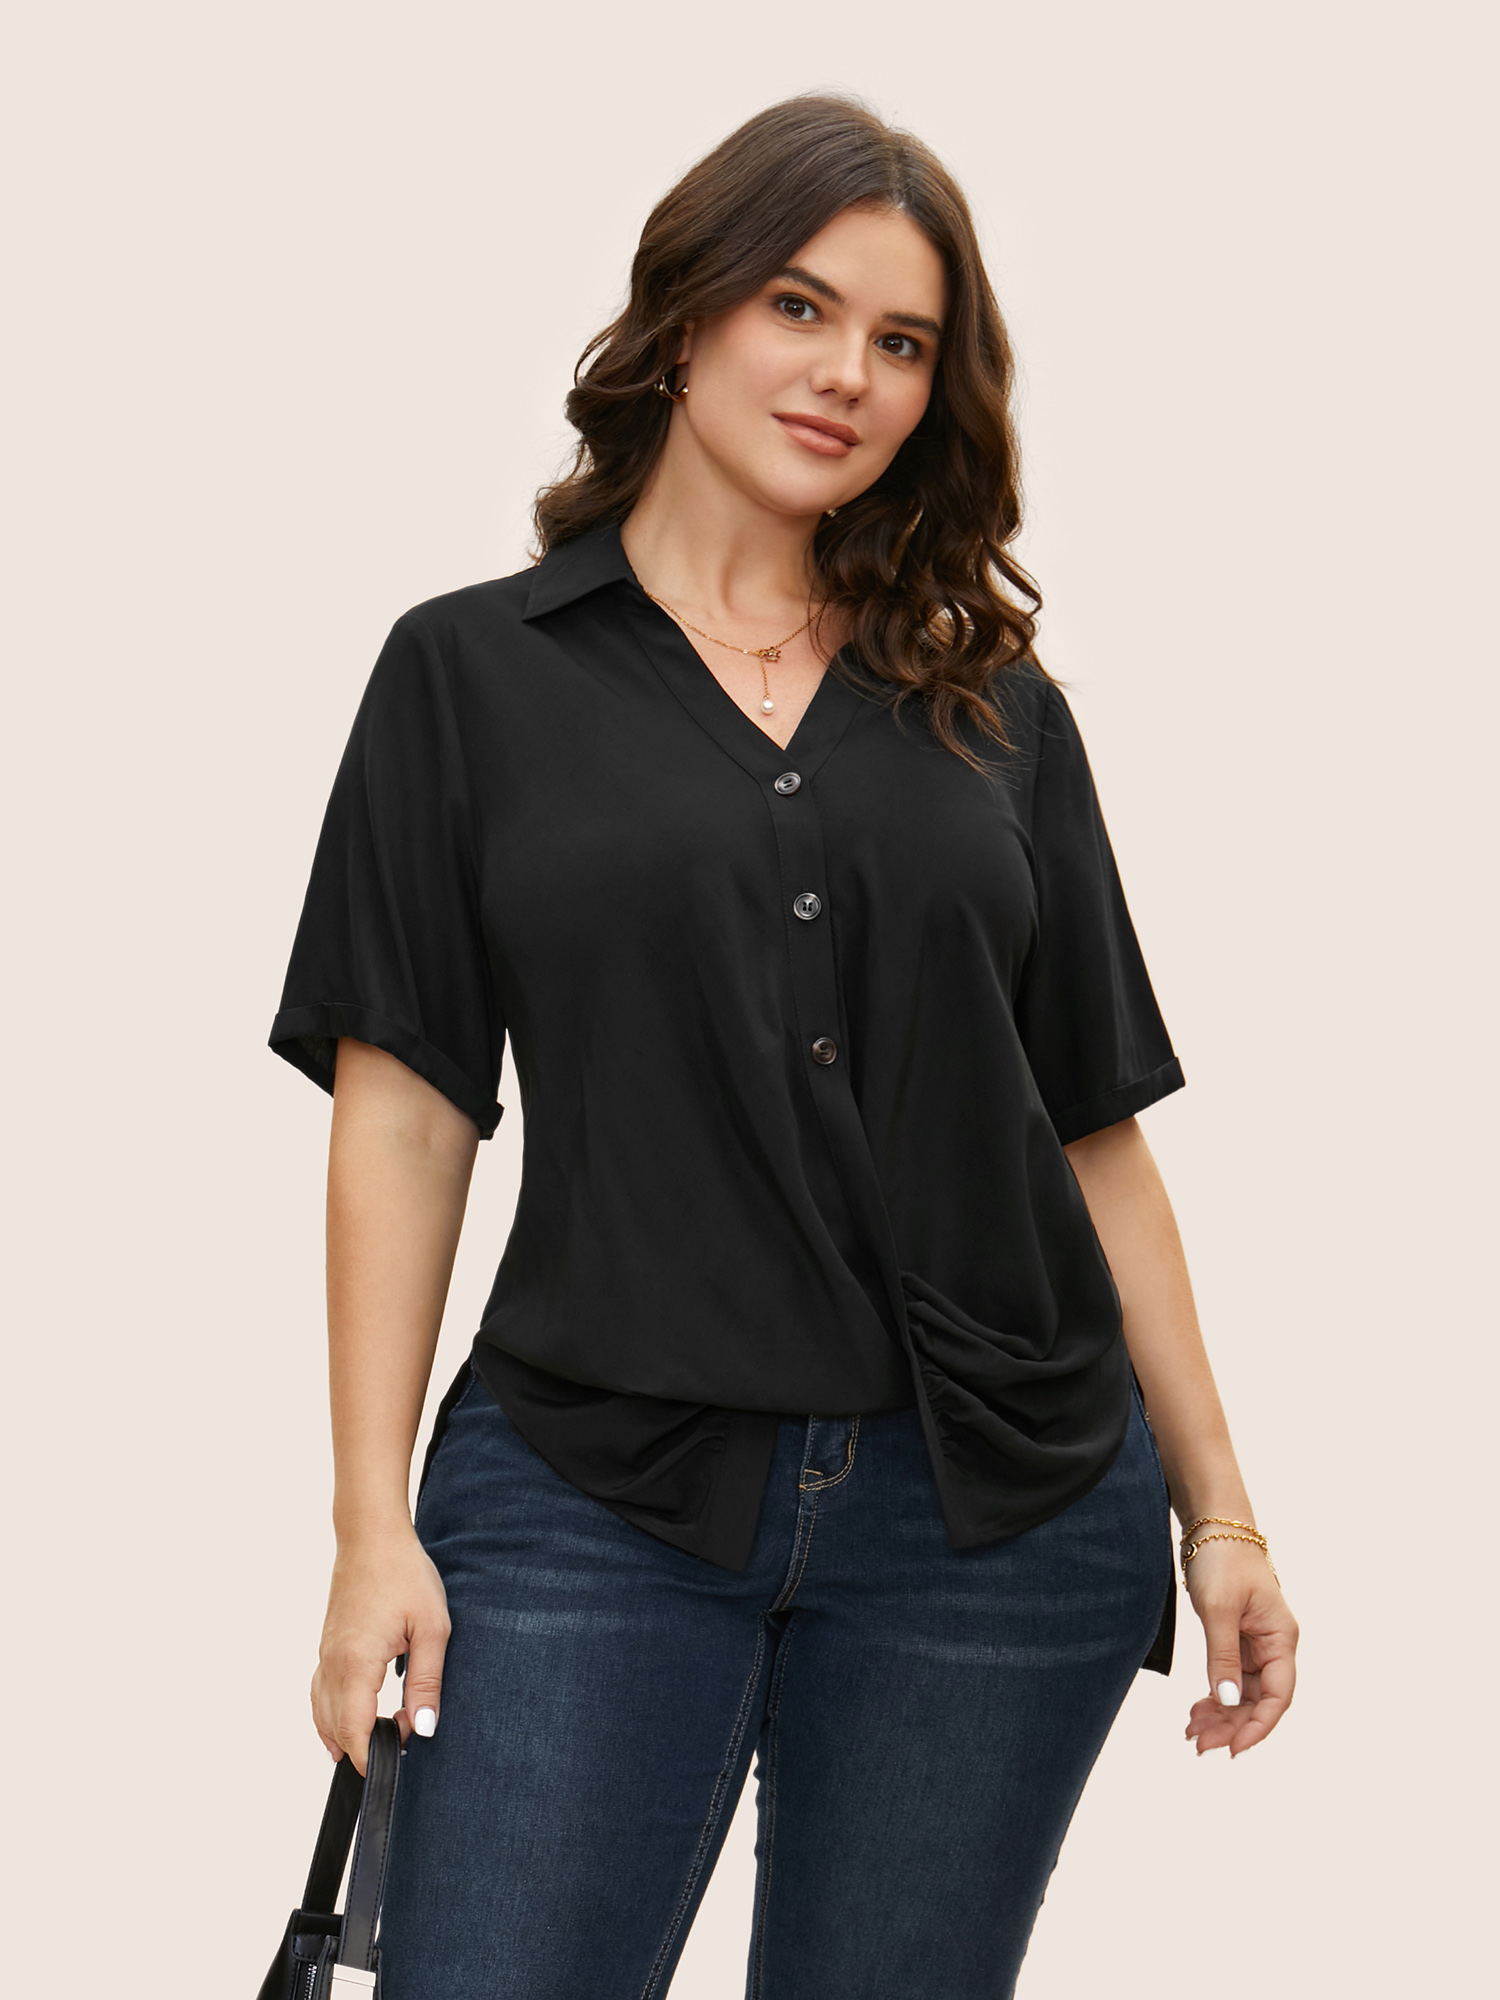 

Plus Size Black Shirt Collar Twist Front Button Up Blouse Women At the Office Short sleeve Shirt collar Work Blouses BloomChic